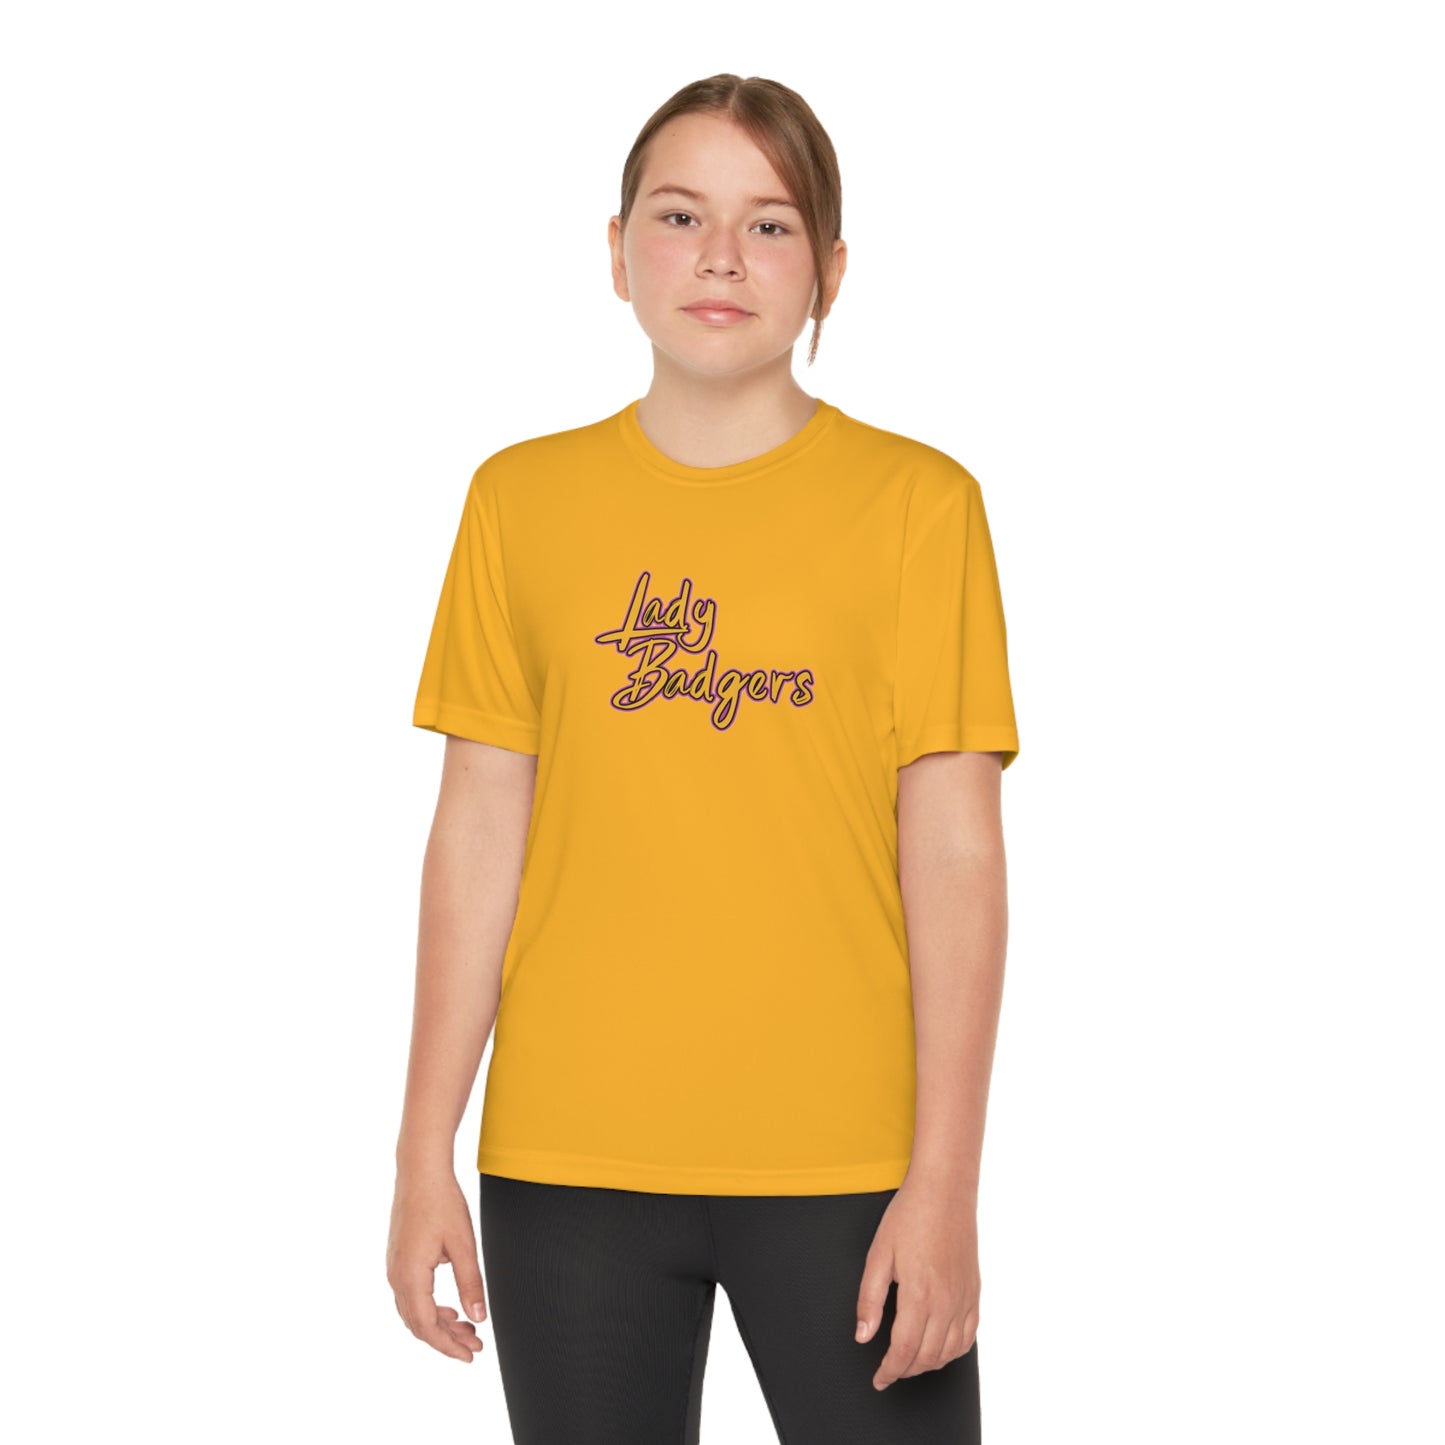 Youth Dri-Fit Tee (Lady Badgers)